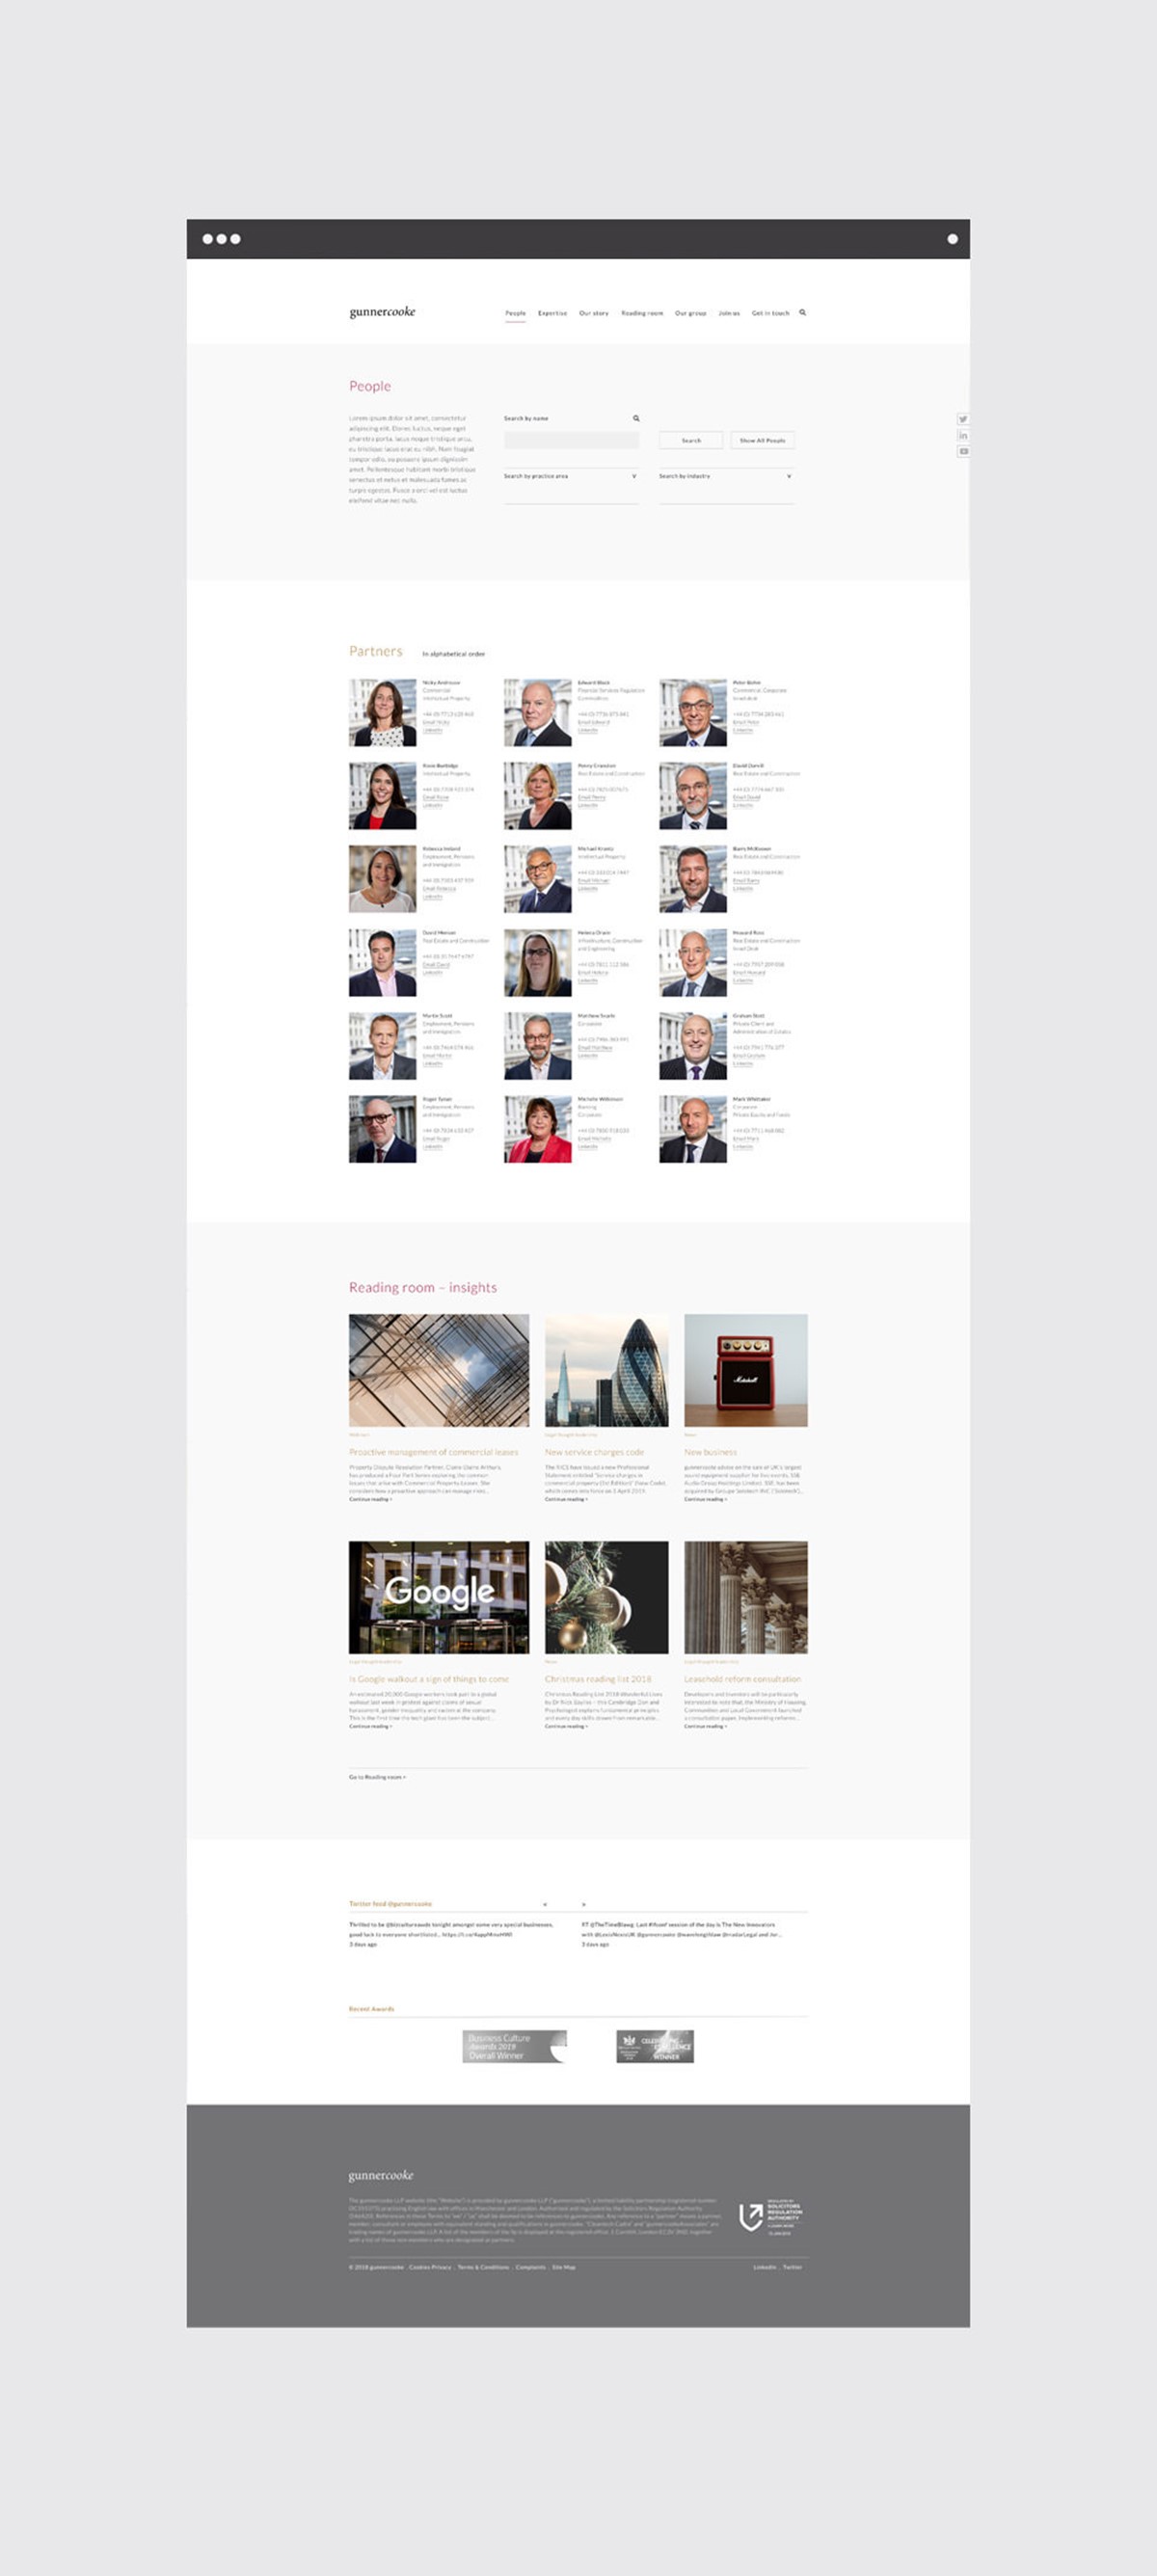 Gunnercooke. Law firm. Consultant search page. Website design by Superfried.